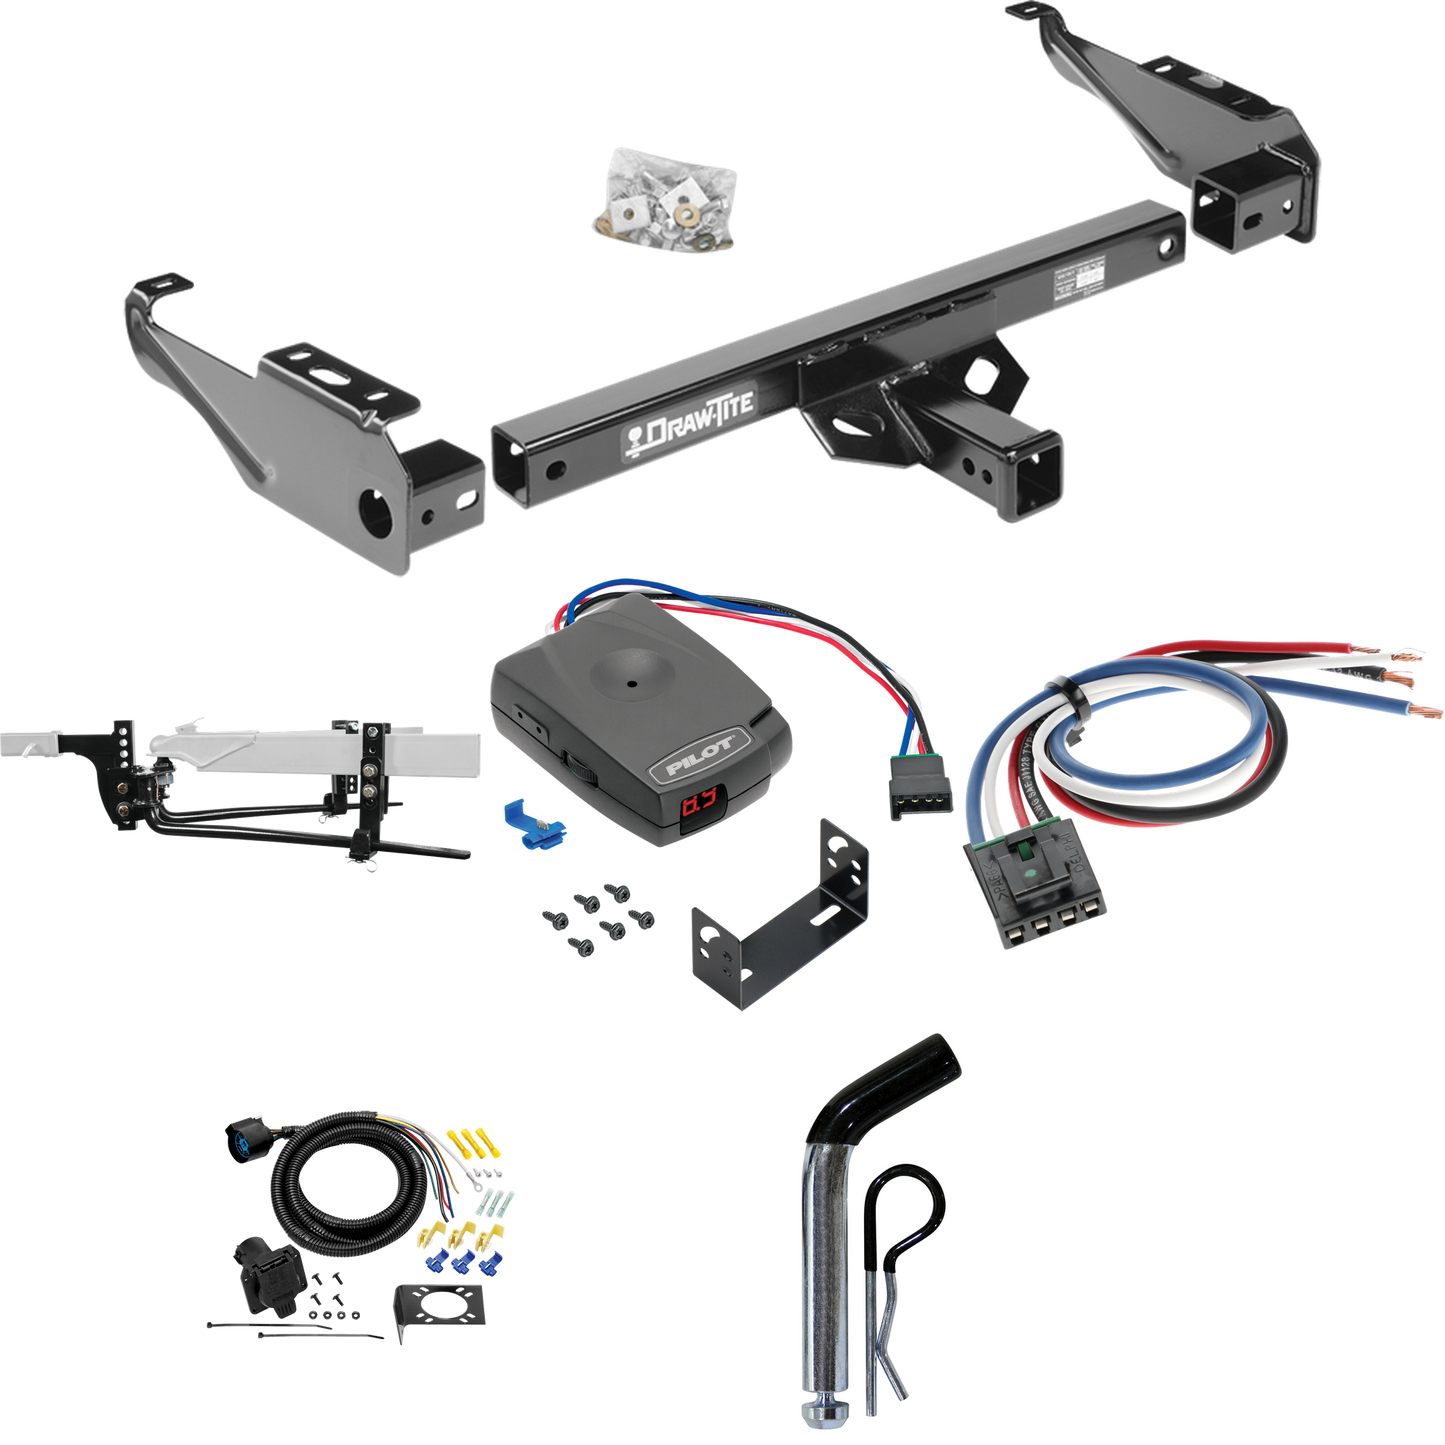 Fits 1994-1994 Dodge Ram 1500 Trailer Hitch Tow PKG w/ 11.5K Round Bar Weight Distribution Hitch w/ 2-5/16" Ball + Pin/Clip + Pro Series Pilot Brake Control + Generic BC Wiring Adapter + 7-Way RV Wiring By Draw-Tite